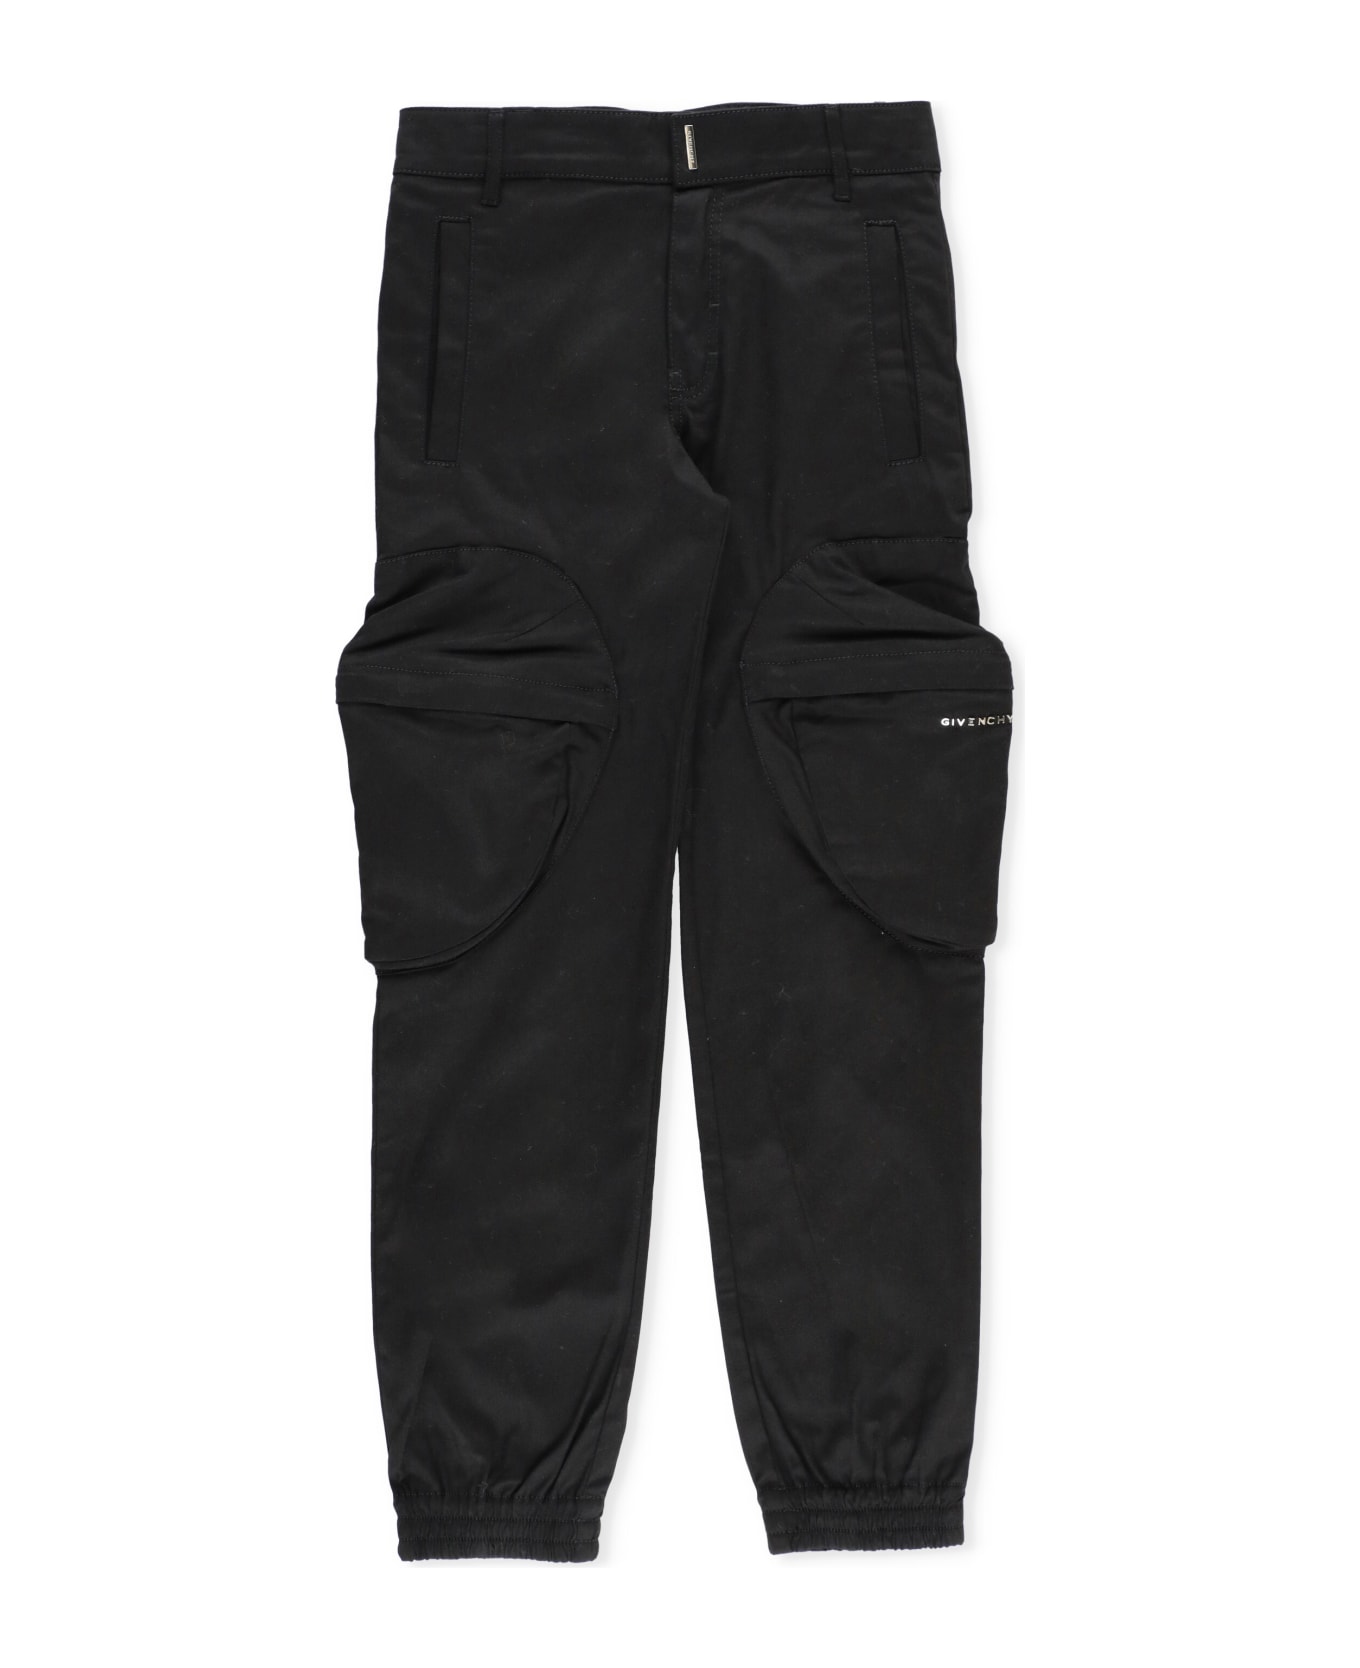 Givenchy Cotton Cargo Trousers - Black